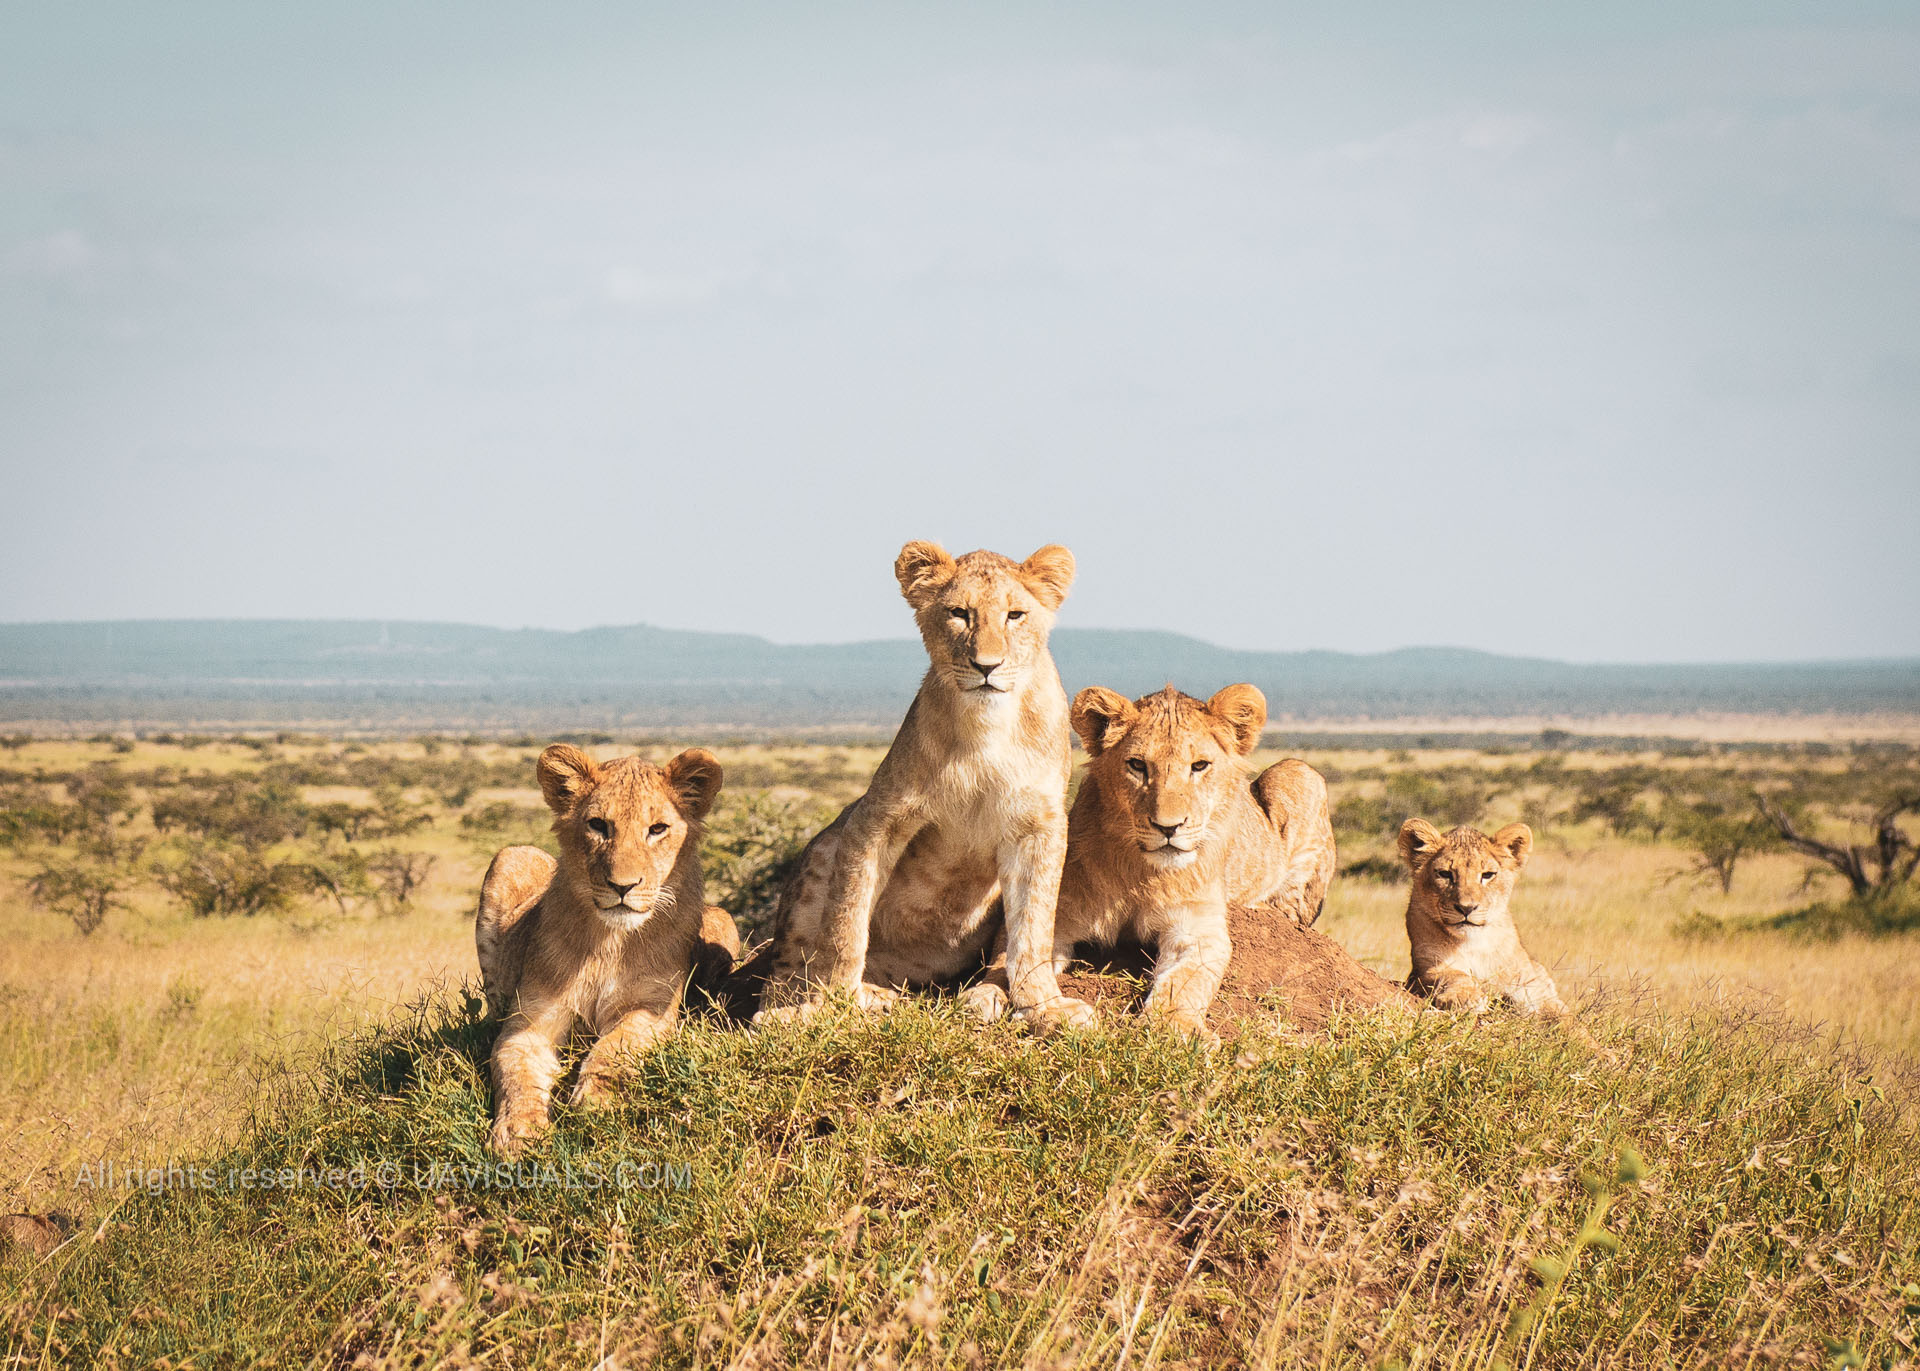 Mugie Conservancy Lions